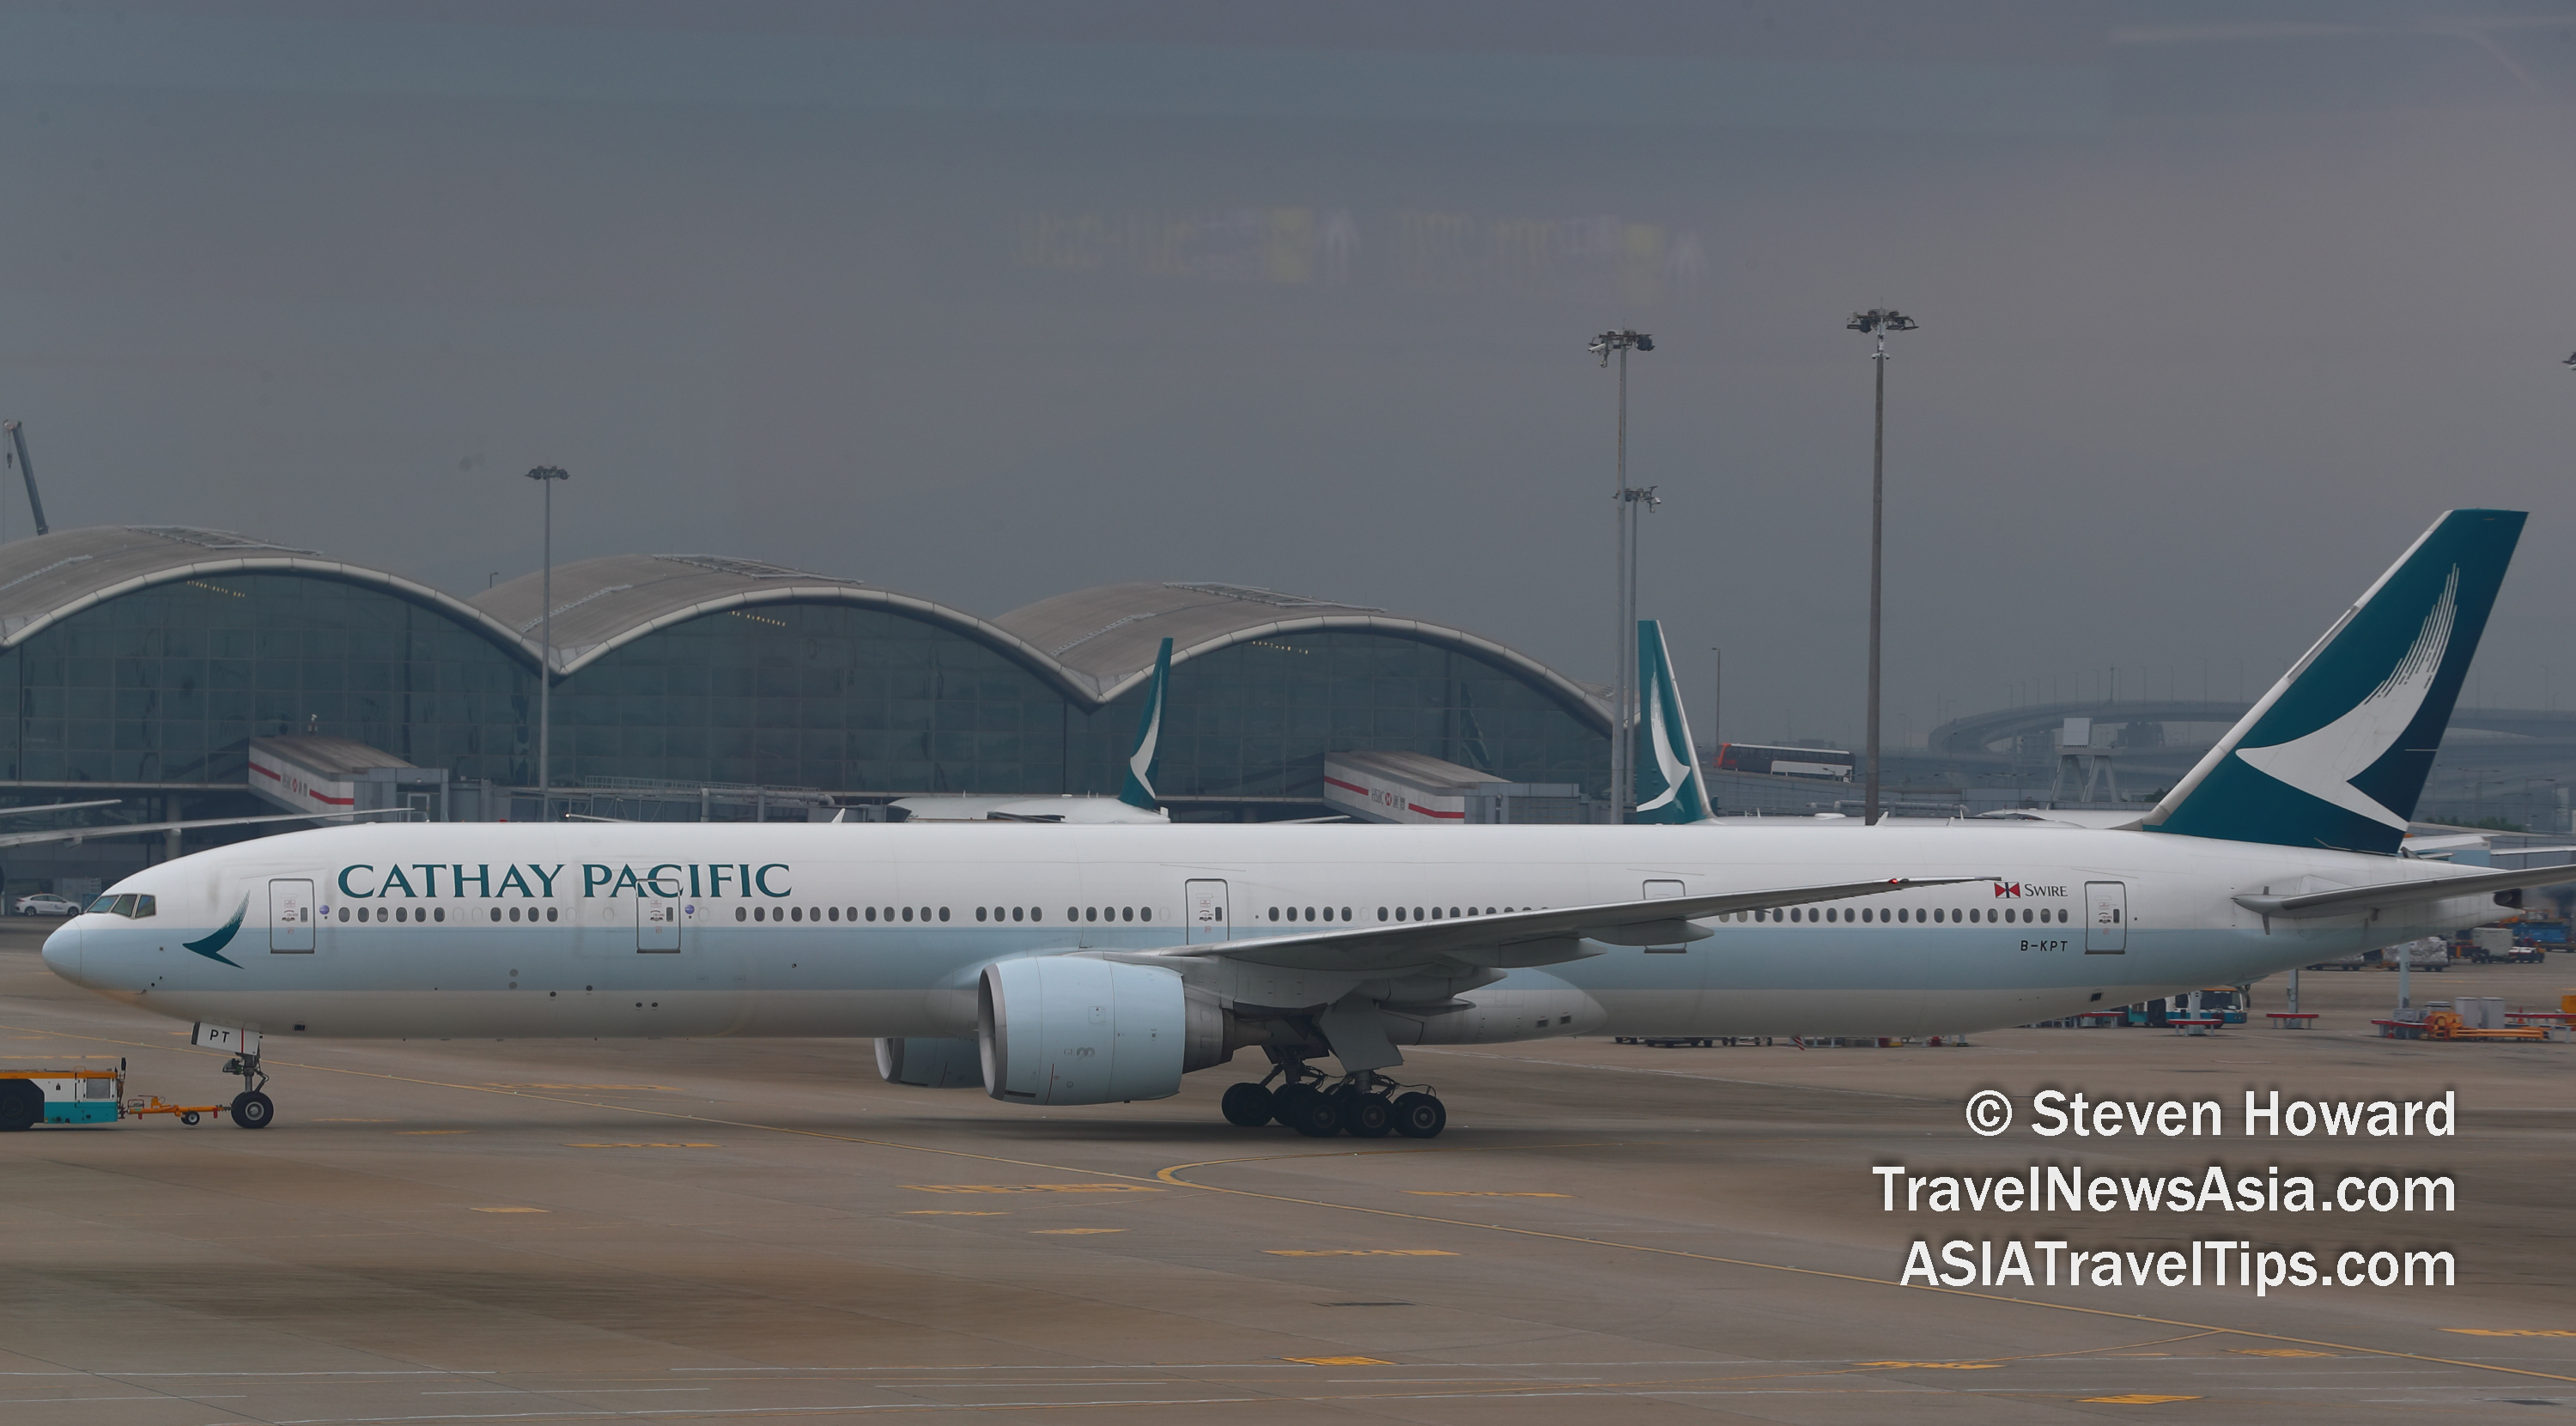 Cathay Pacific Boeing 777-300 reg: B-KPT. Picture by Steven Howard of TravelNewsAsia.com Click to enlarge.